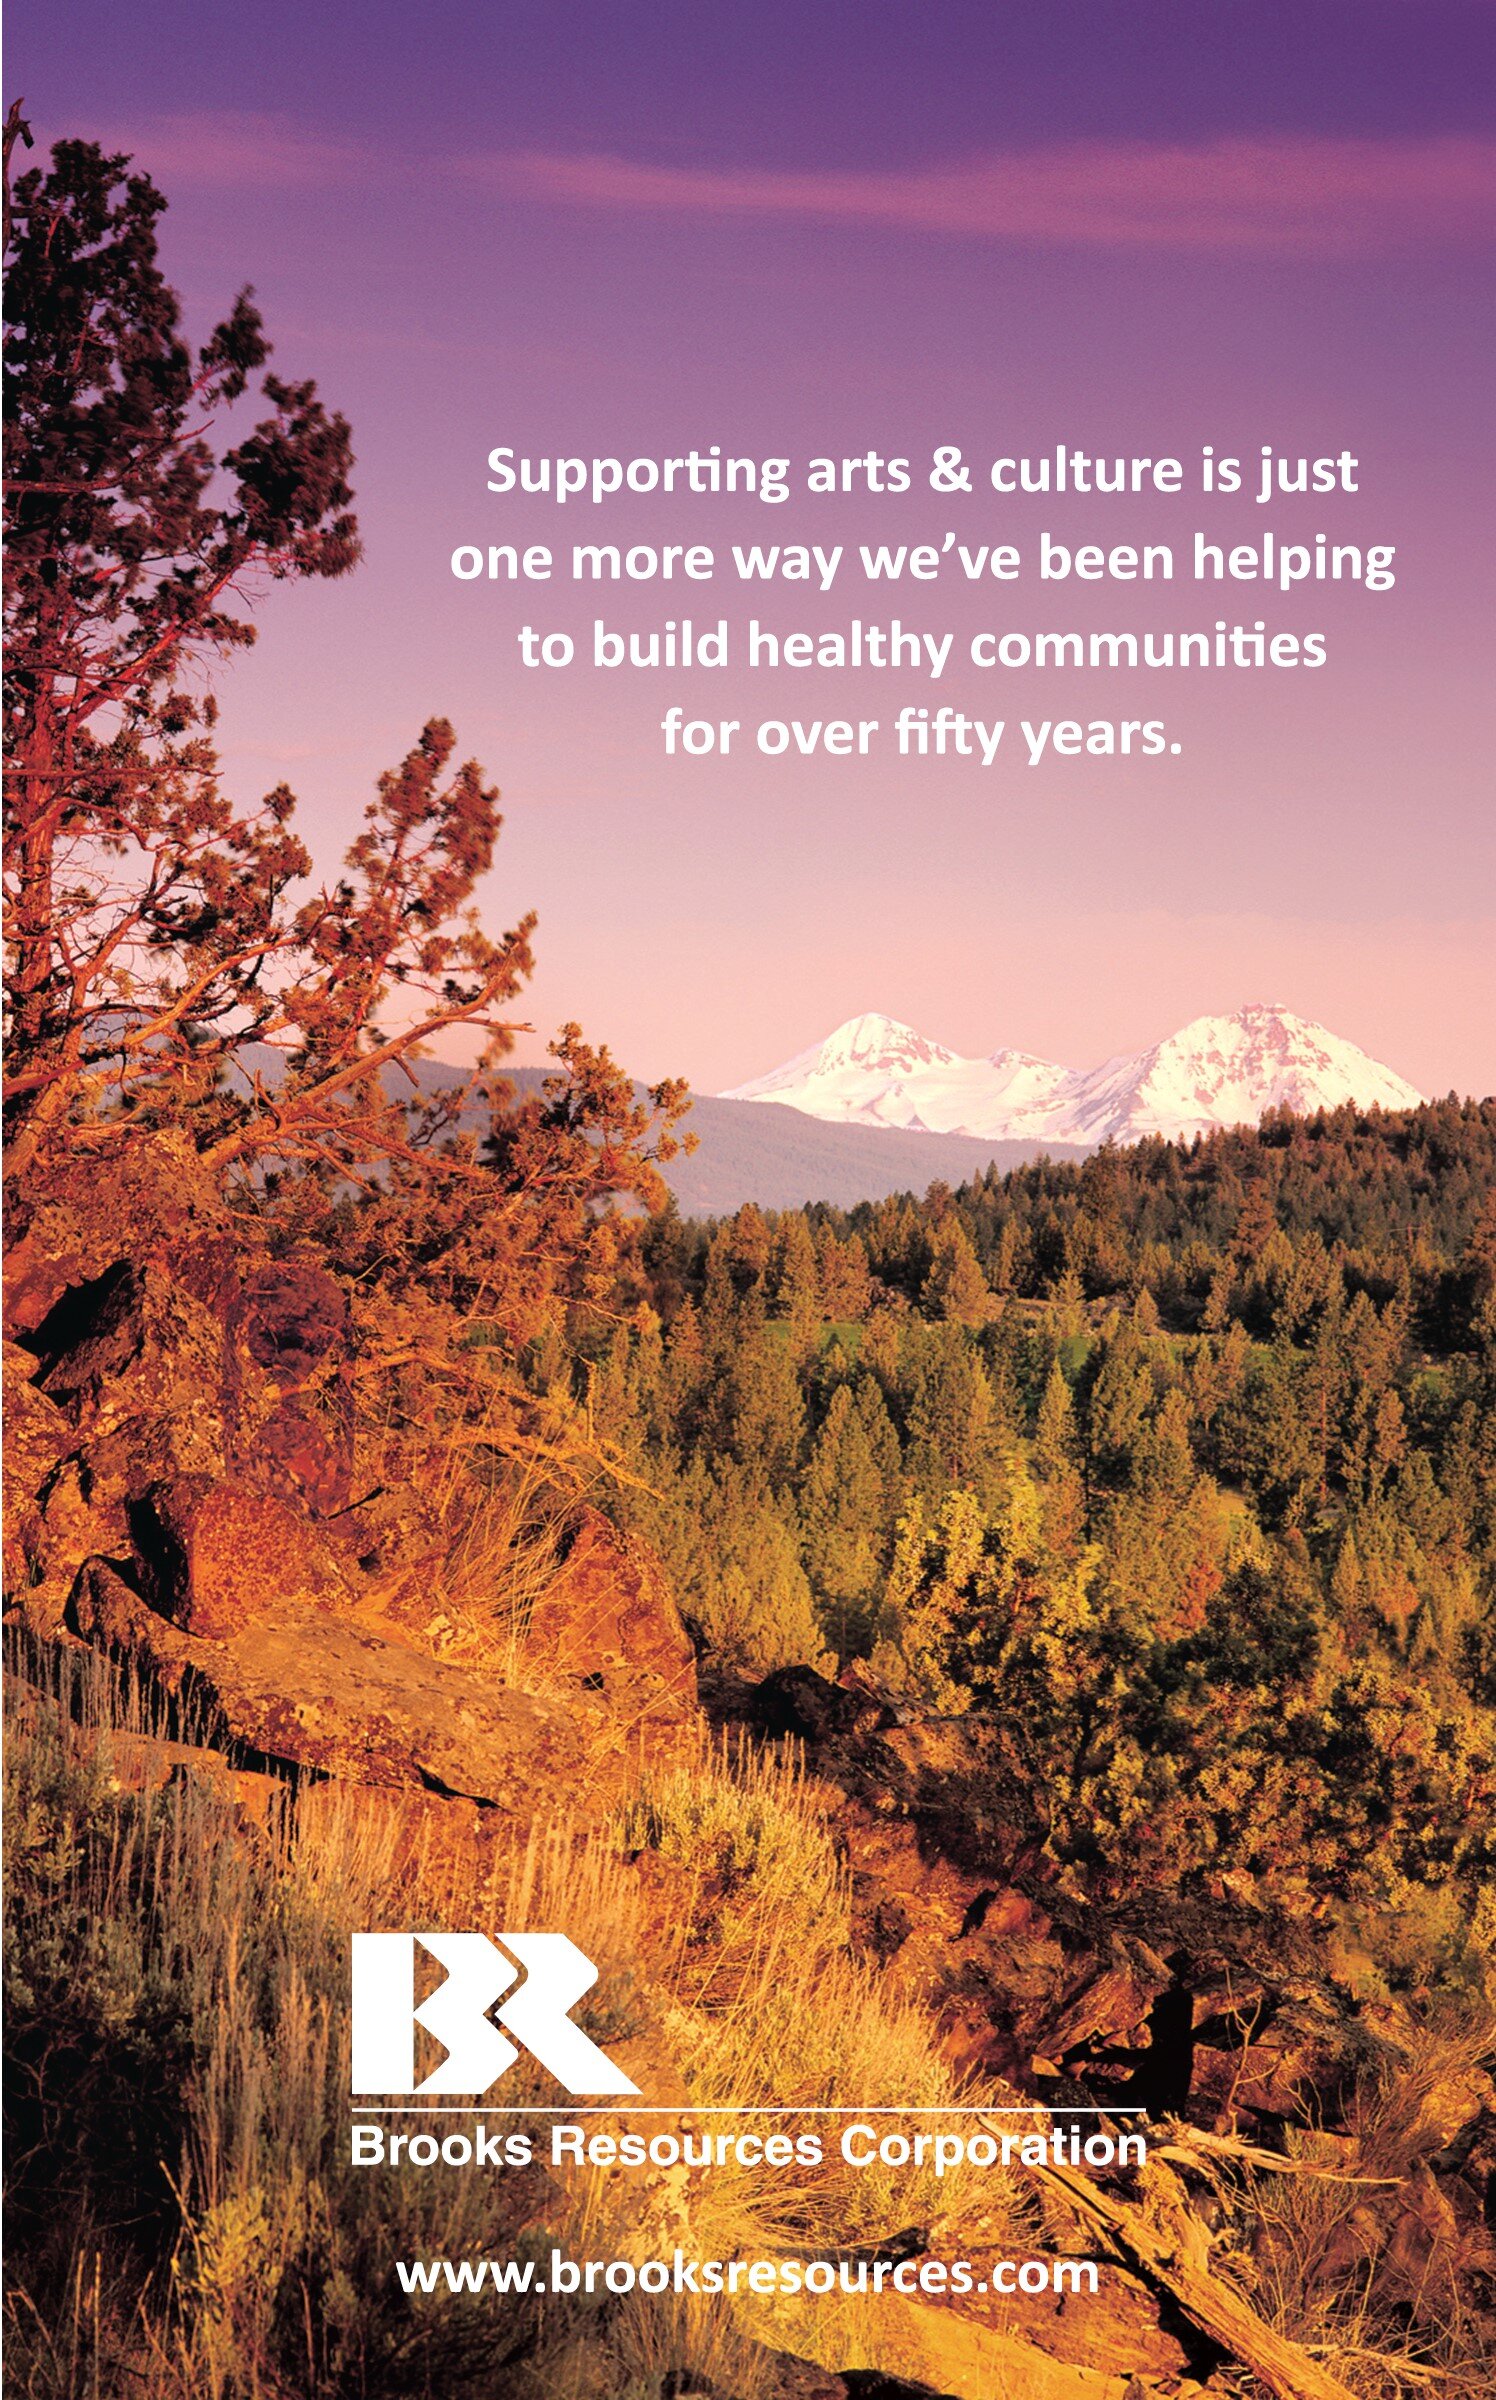 Brooks Resources ad full page color.jpg